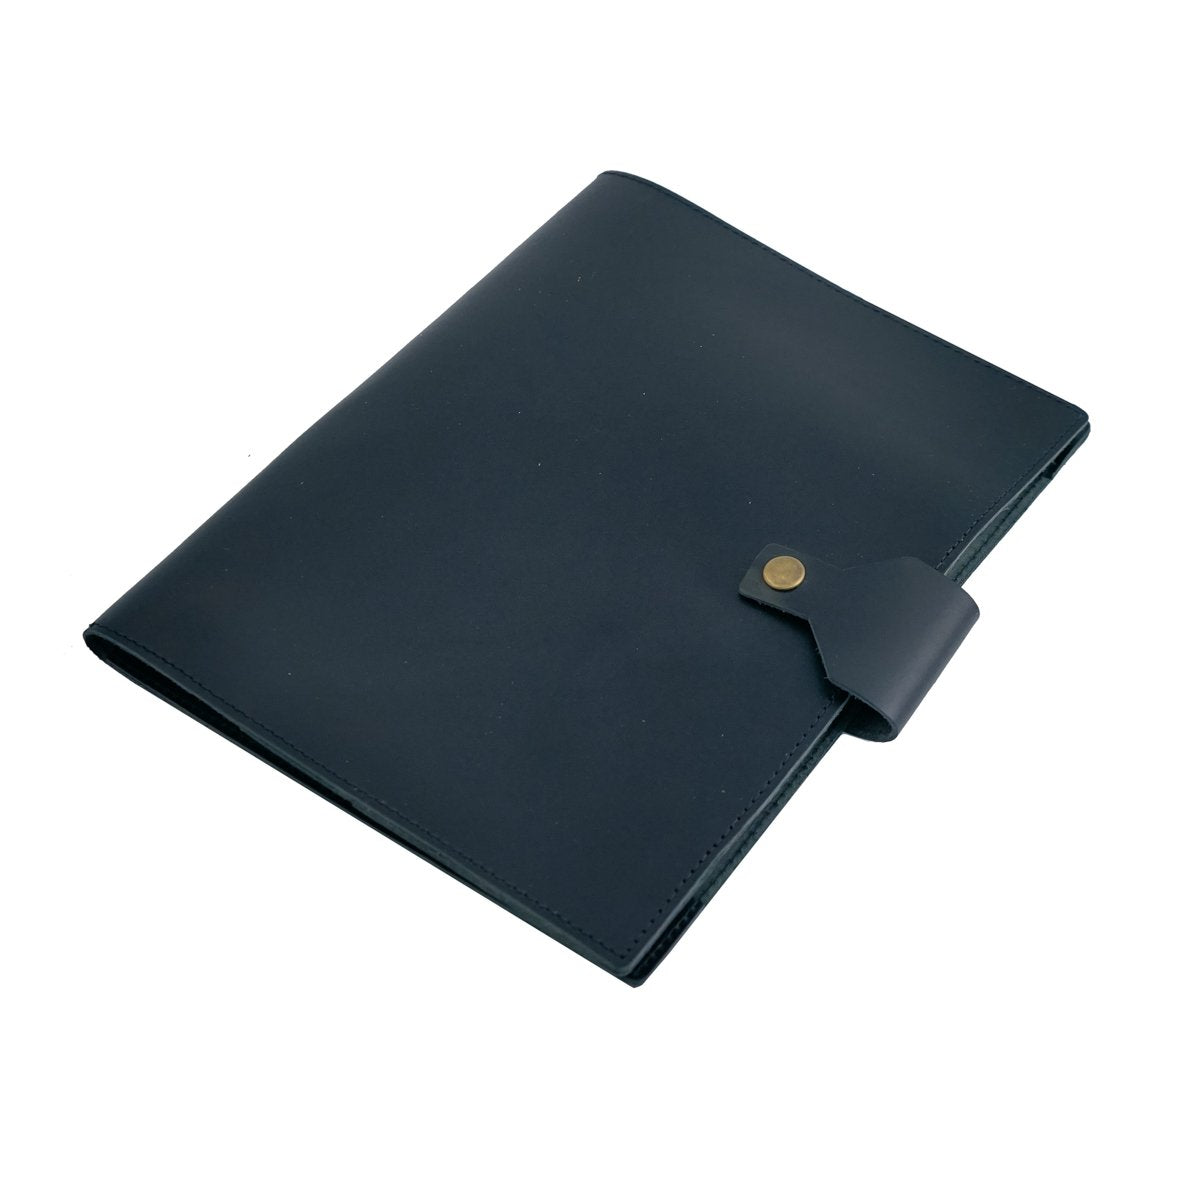 Pacific Mailer Padfolio Portfolio Leather Binder Interview Legal Document Organizer Business Card Holder Included Letter Sized Writing Pad Piano Noir